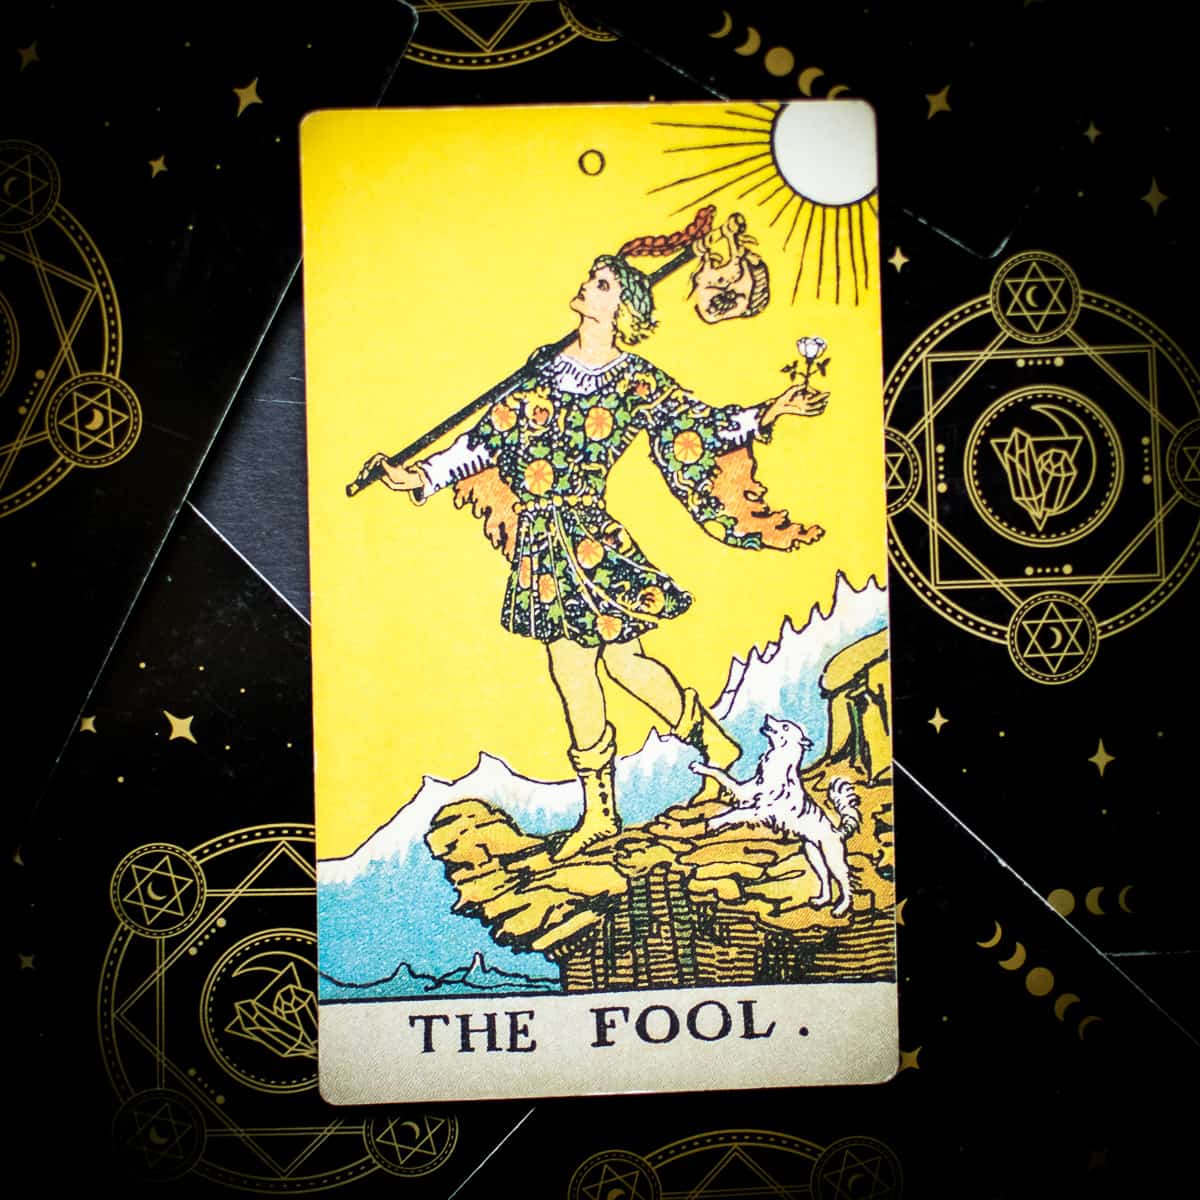 The original illustration from The Fool card in the Rider Waite tarot deck. 